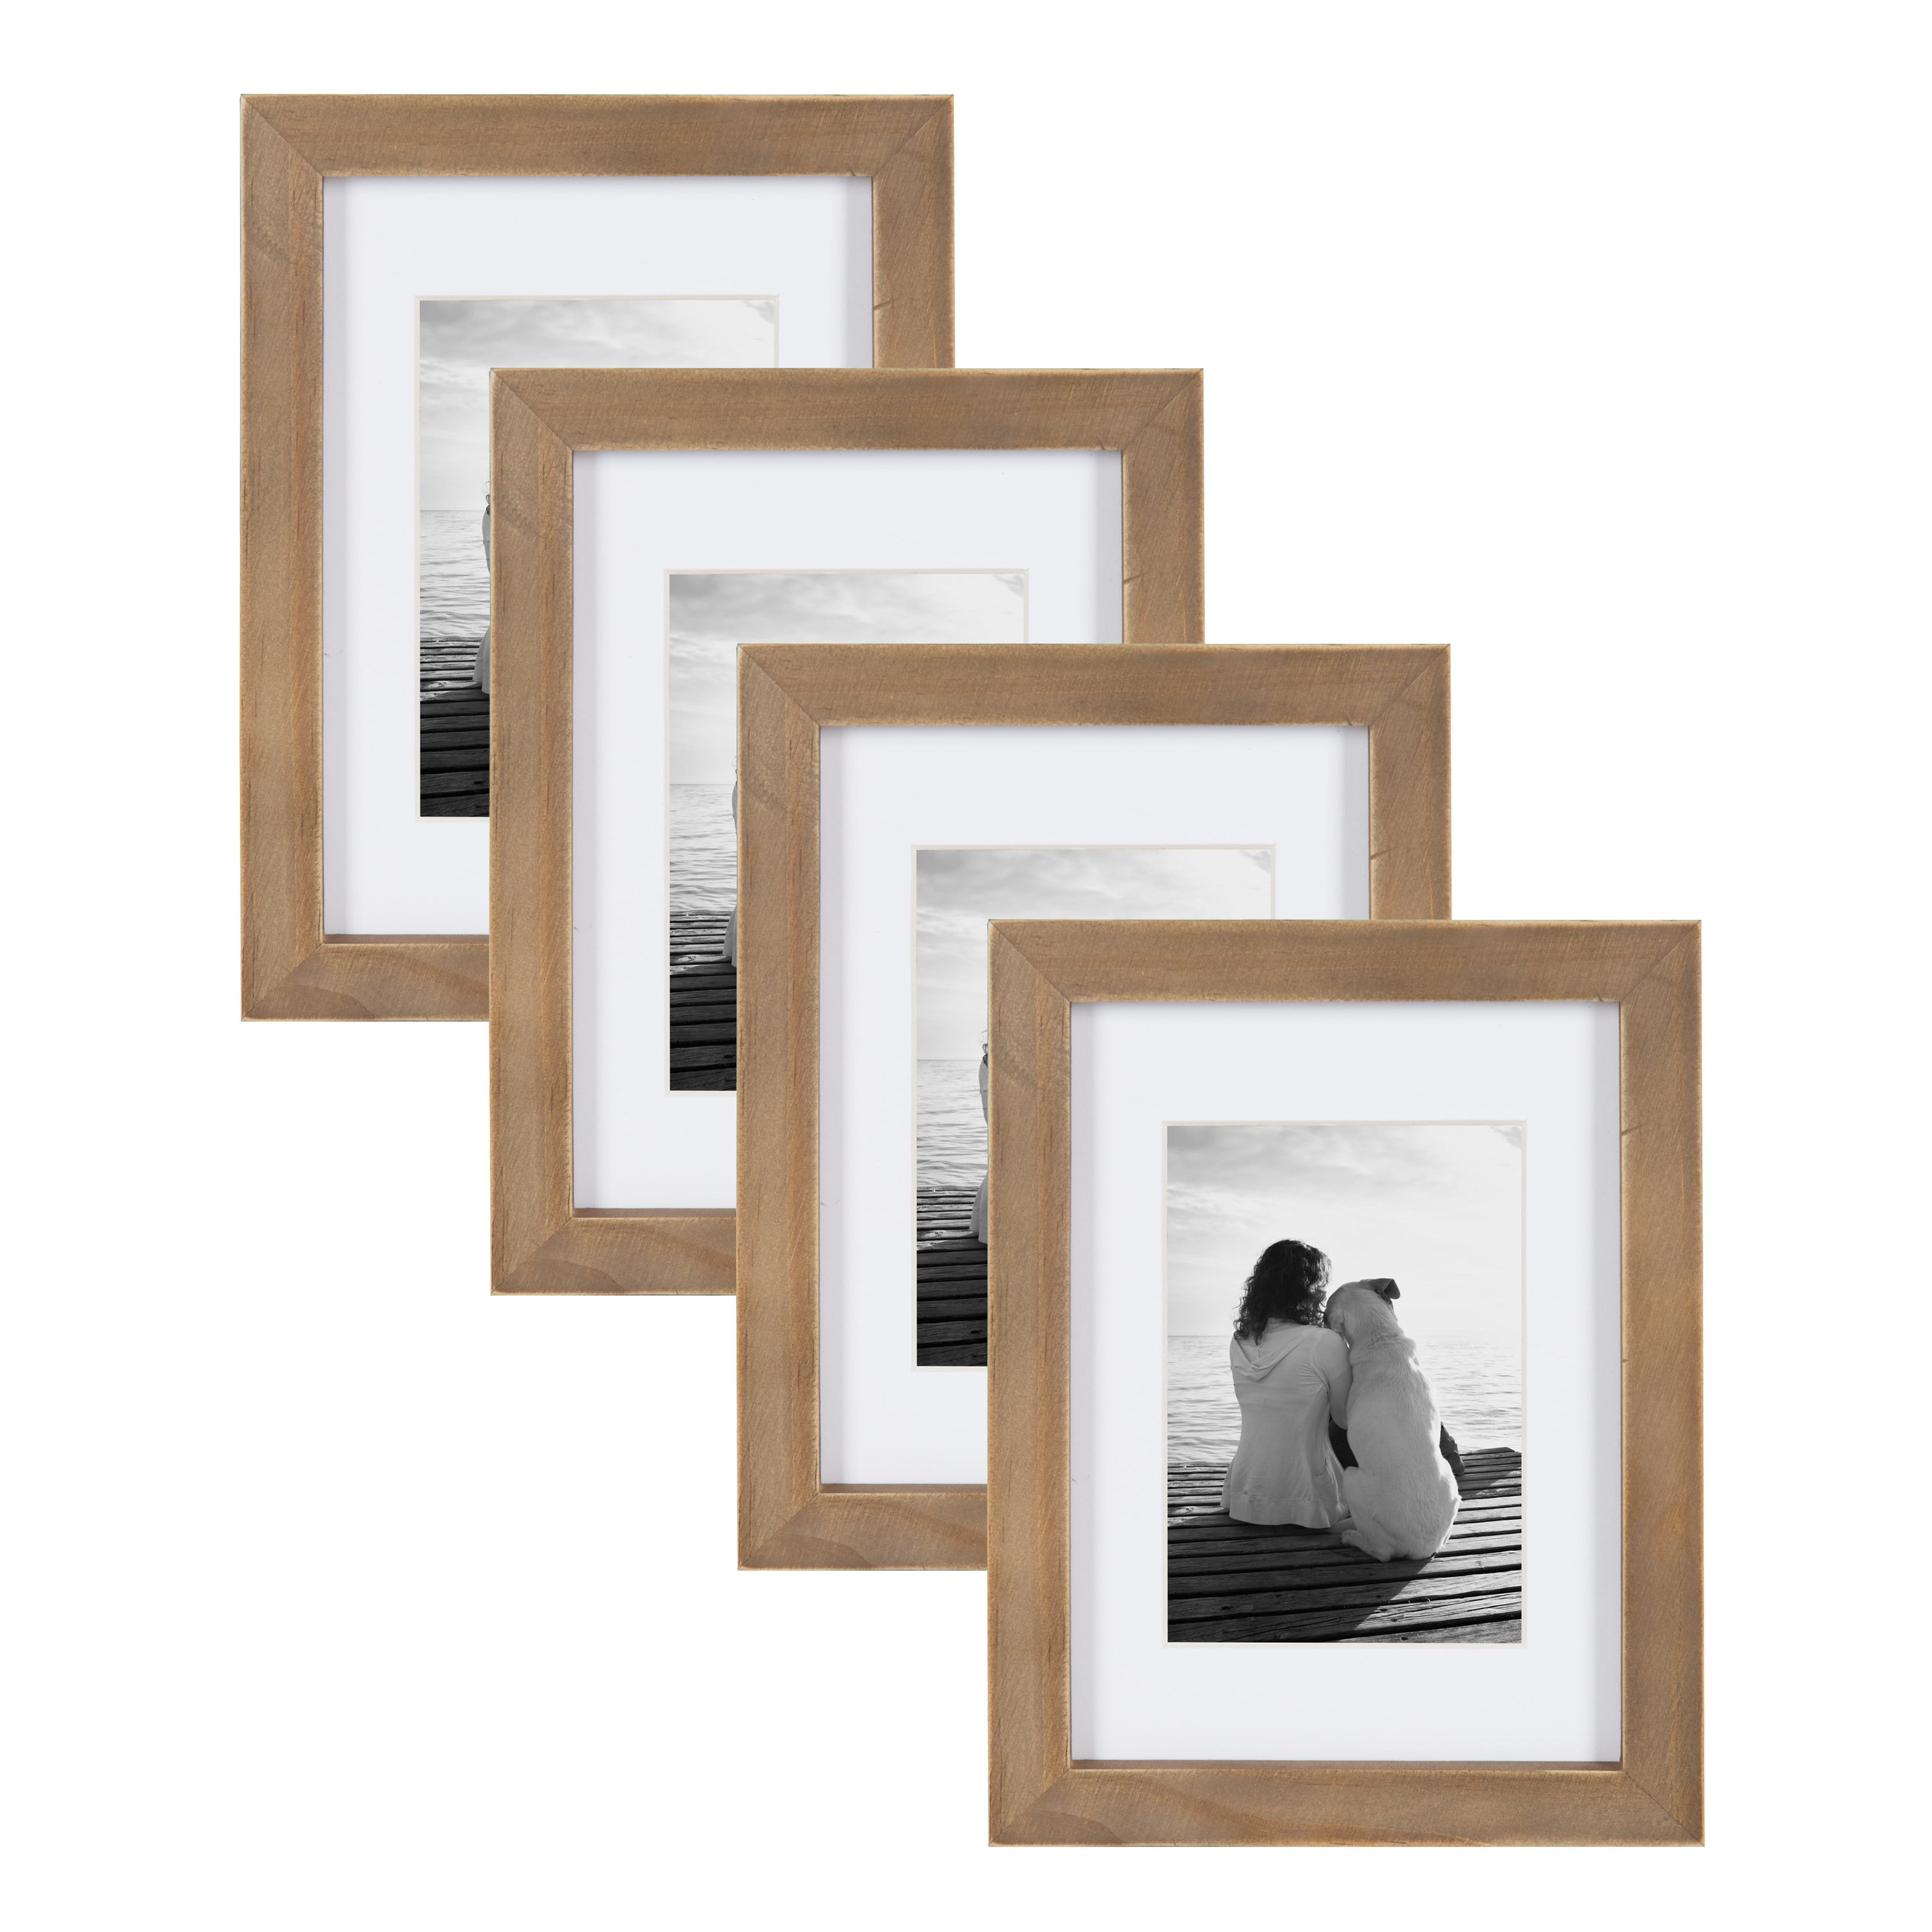 Rustic Brown 16x20 matted to 8x10 DesignOvation Gallery Wood Photo Frame Set for Customizable Wall Display Pack of 2